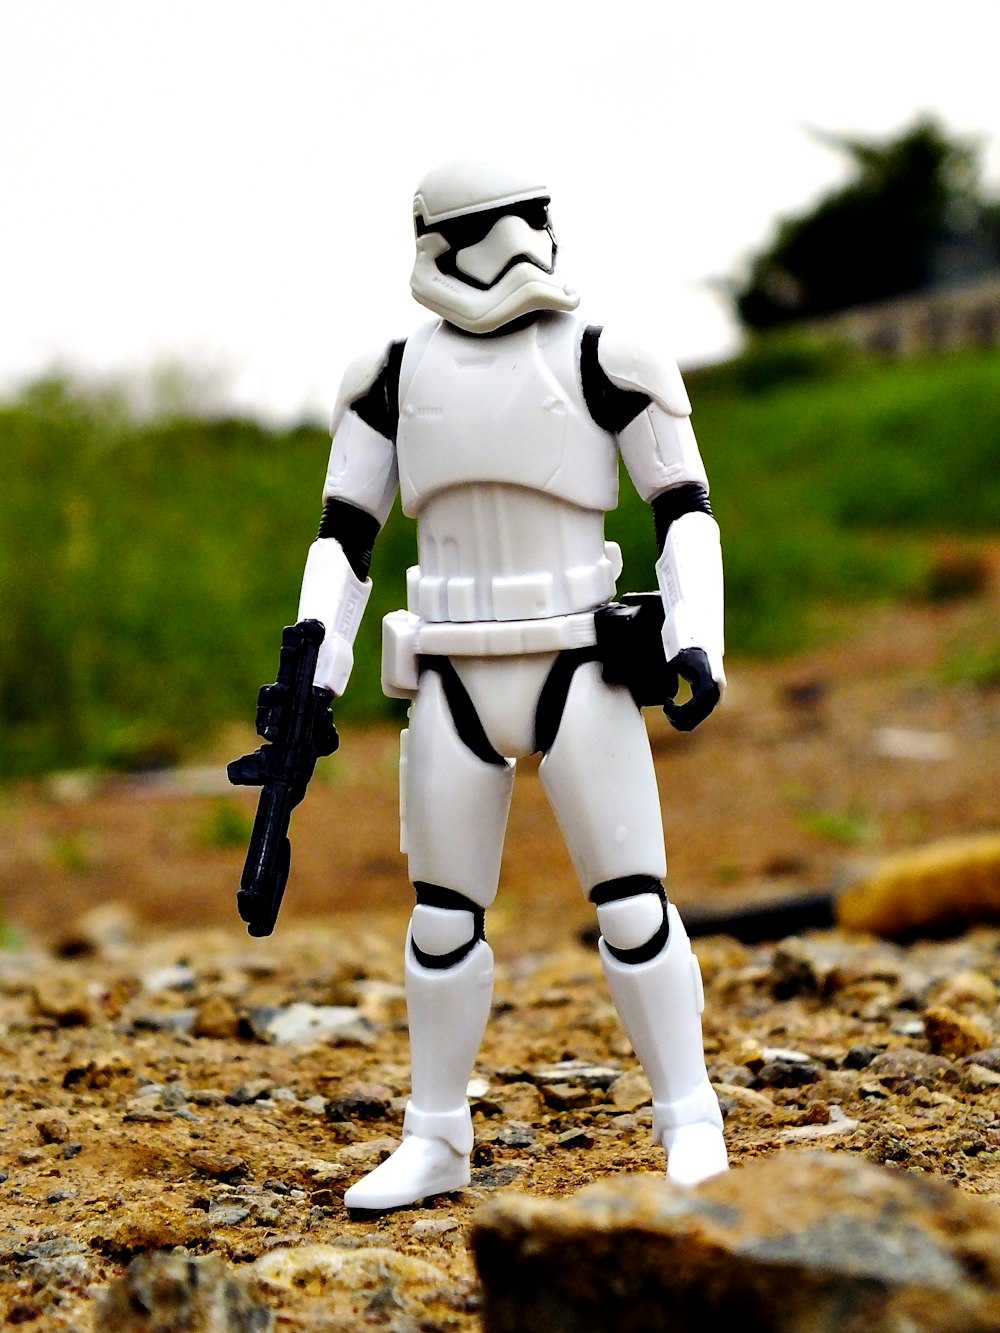 a star wars action figure standing in the dirt